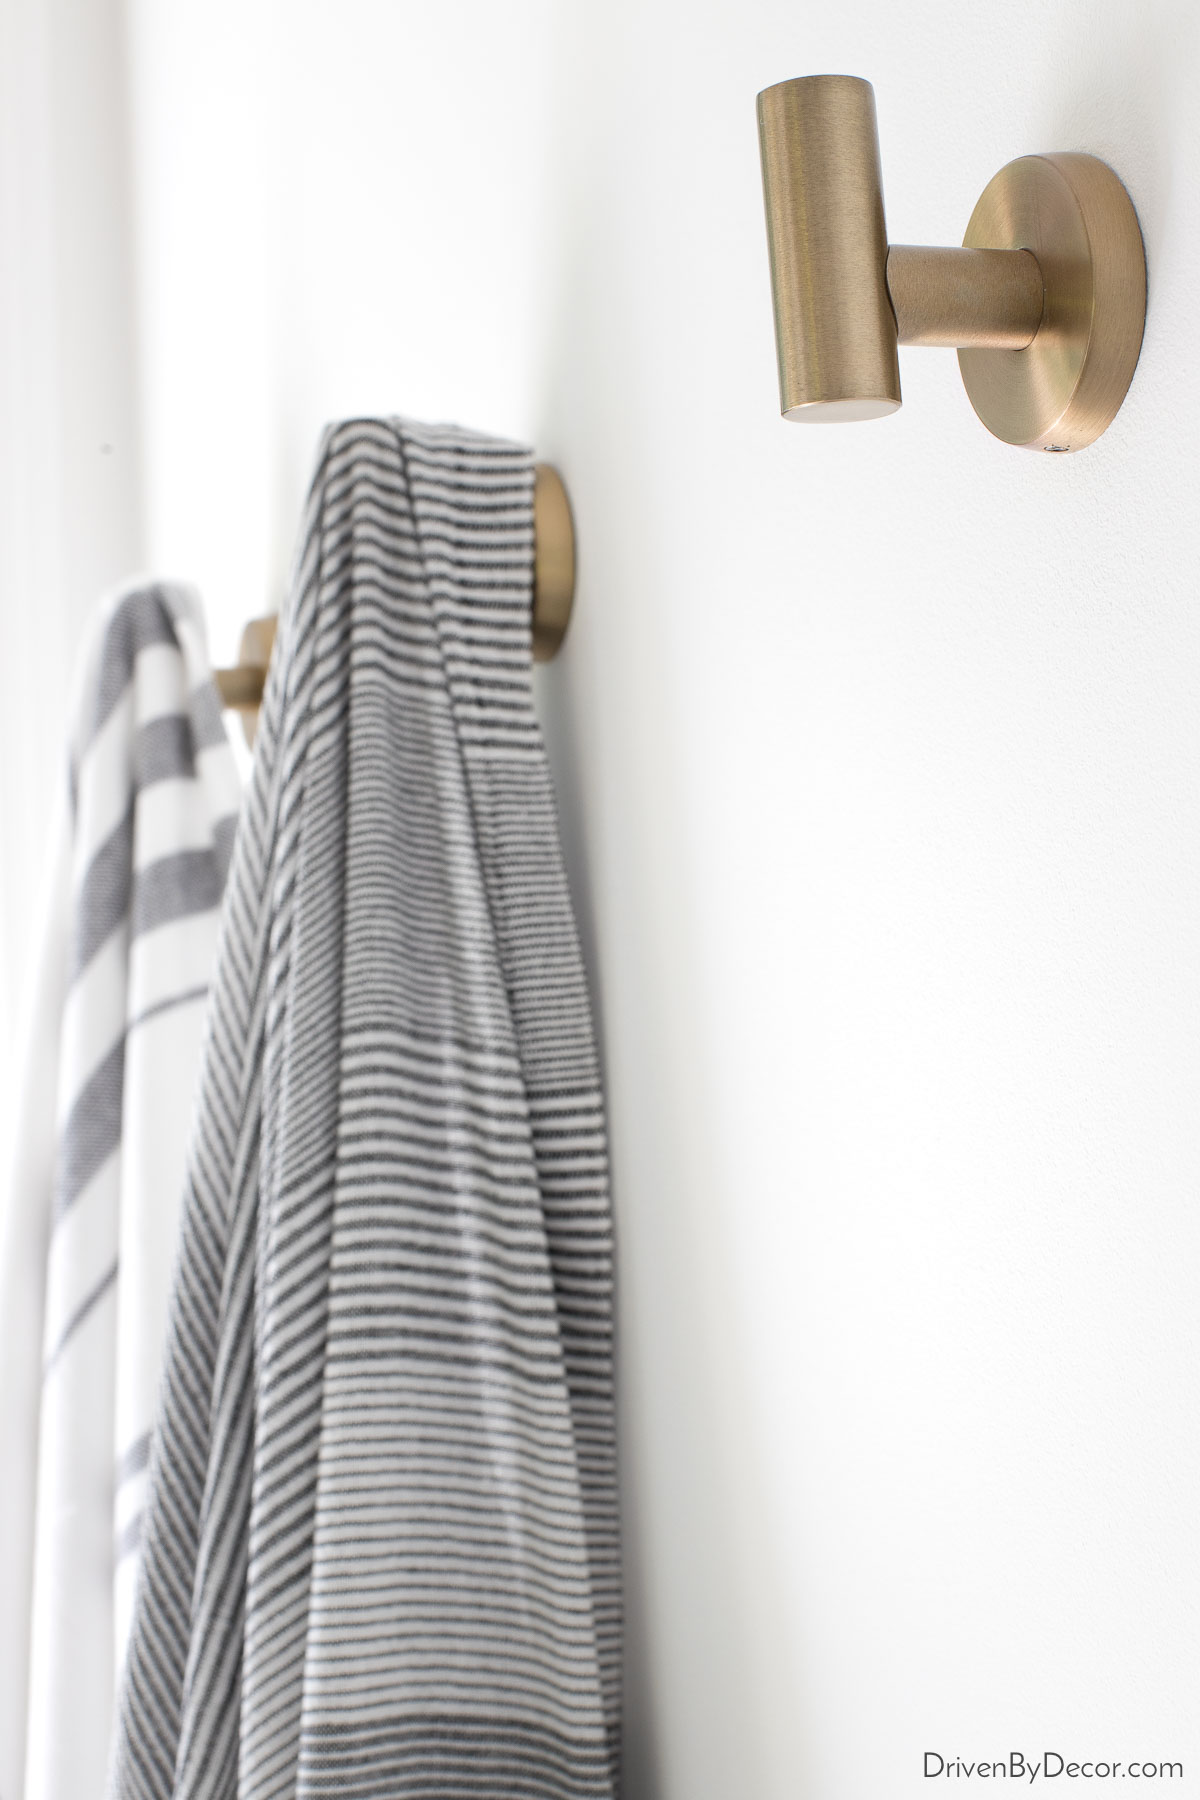 Using towel hooks instead of a towel bar saves space in the bathroom!